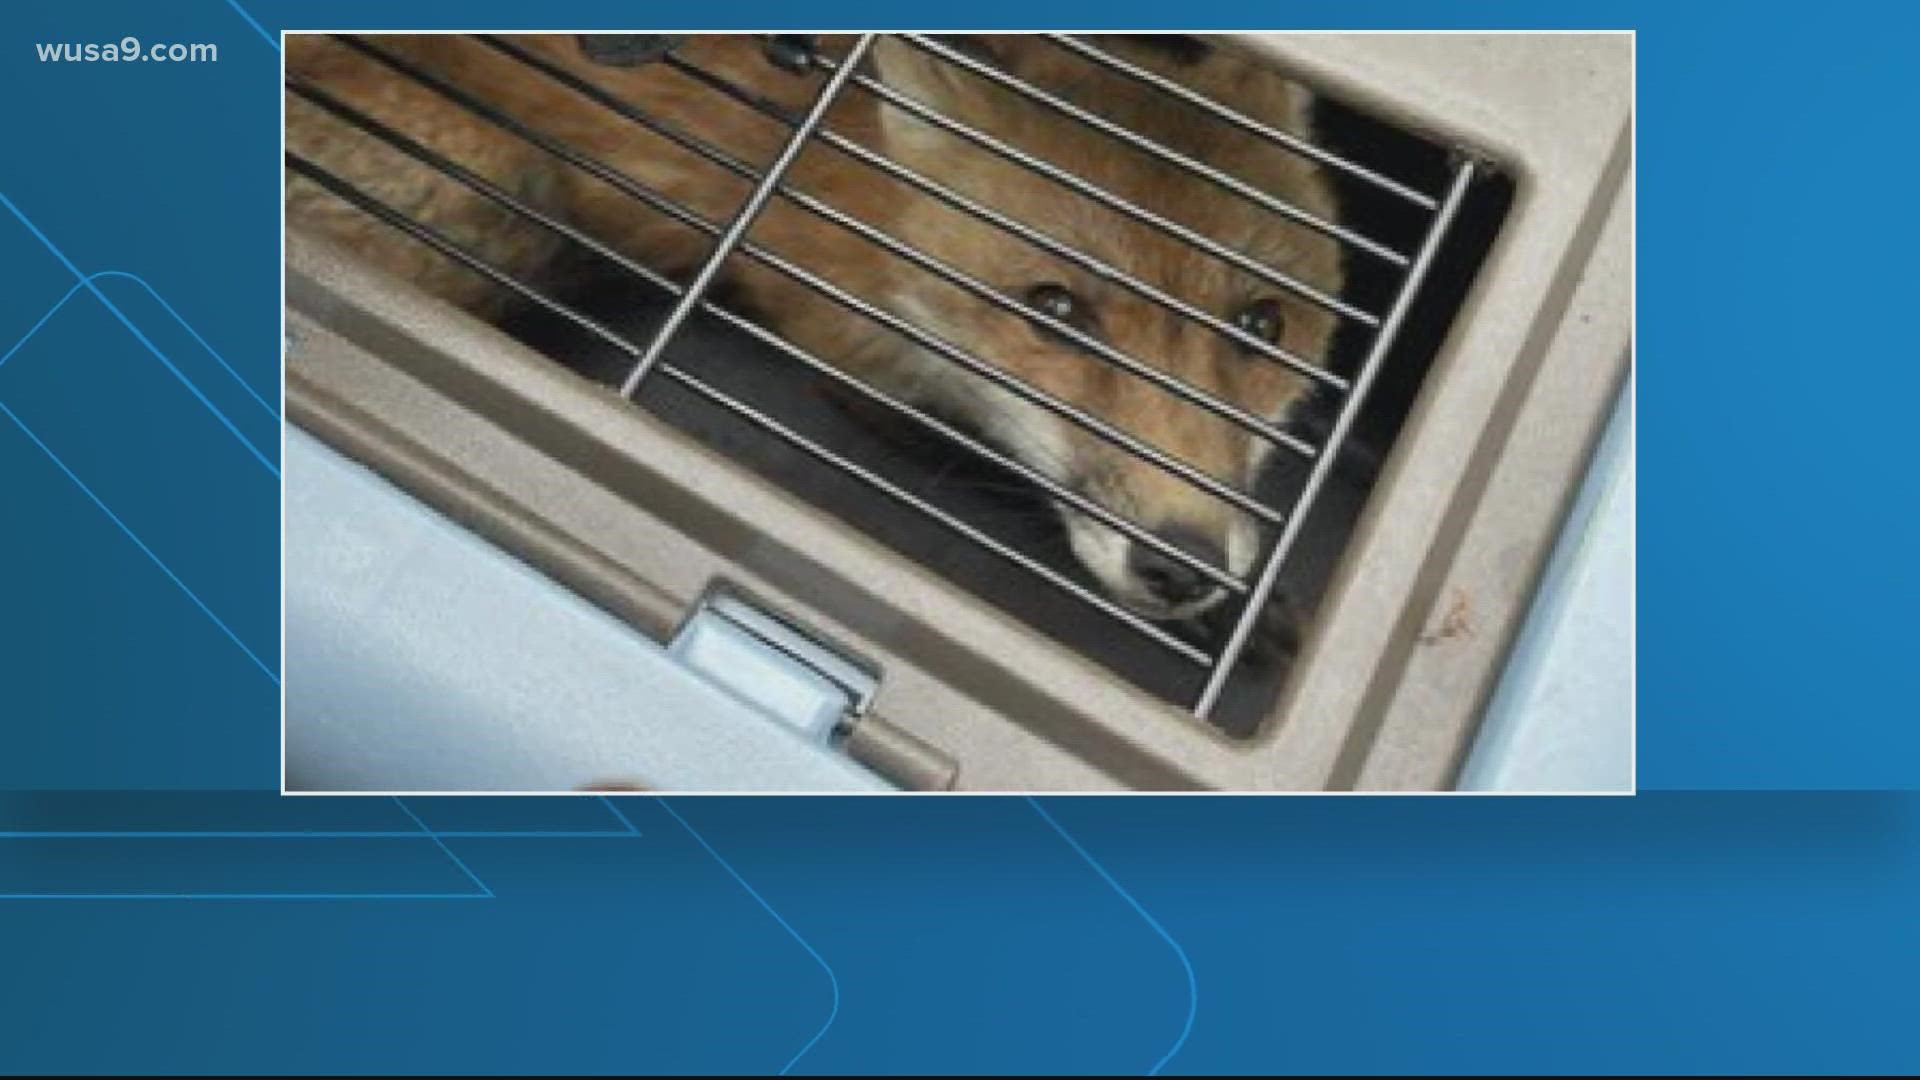 After the fox was euthanized, she tested positive for the rabies virus. Officials located the fox's kits and are working to determine the next steps.